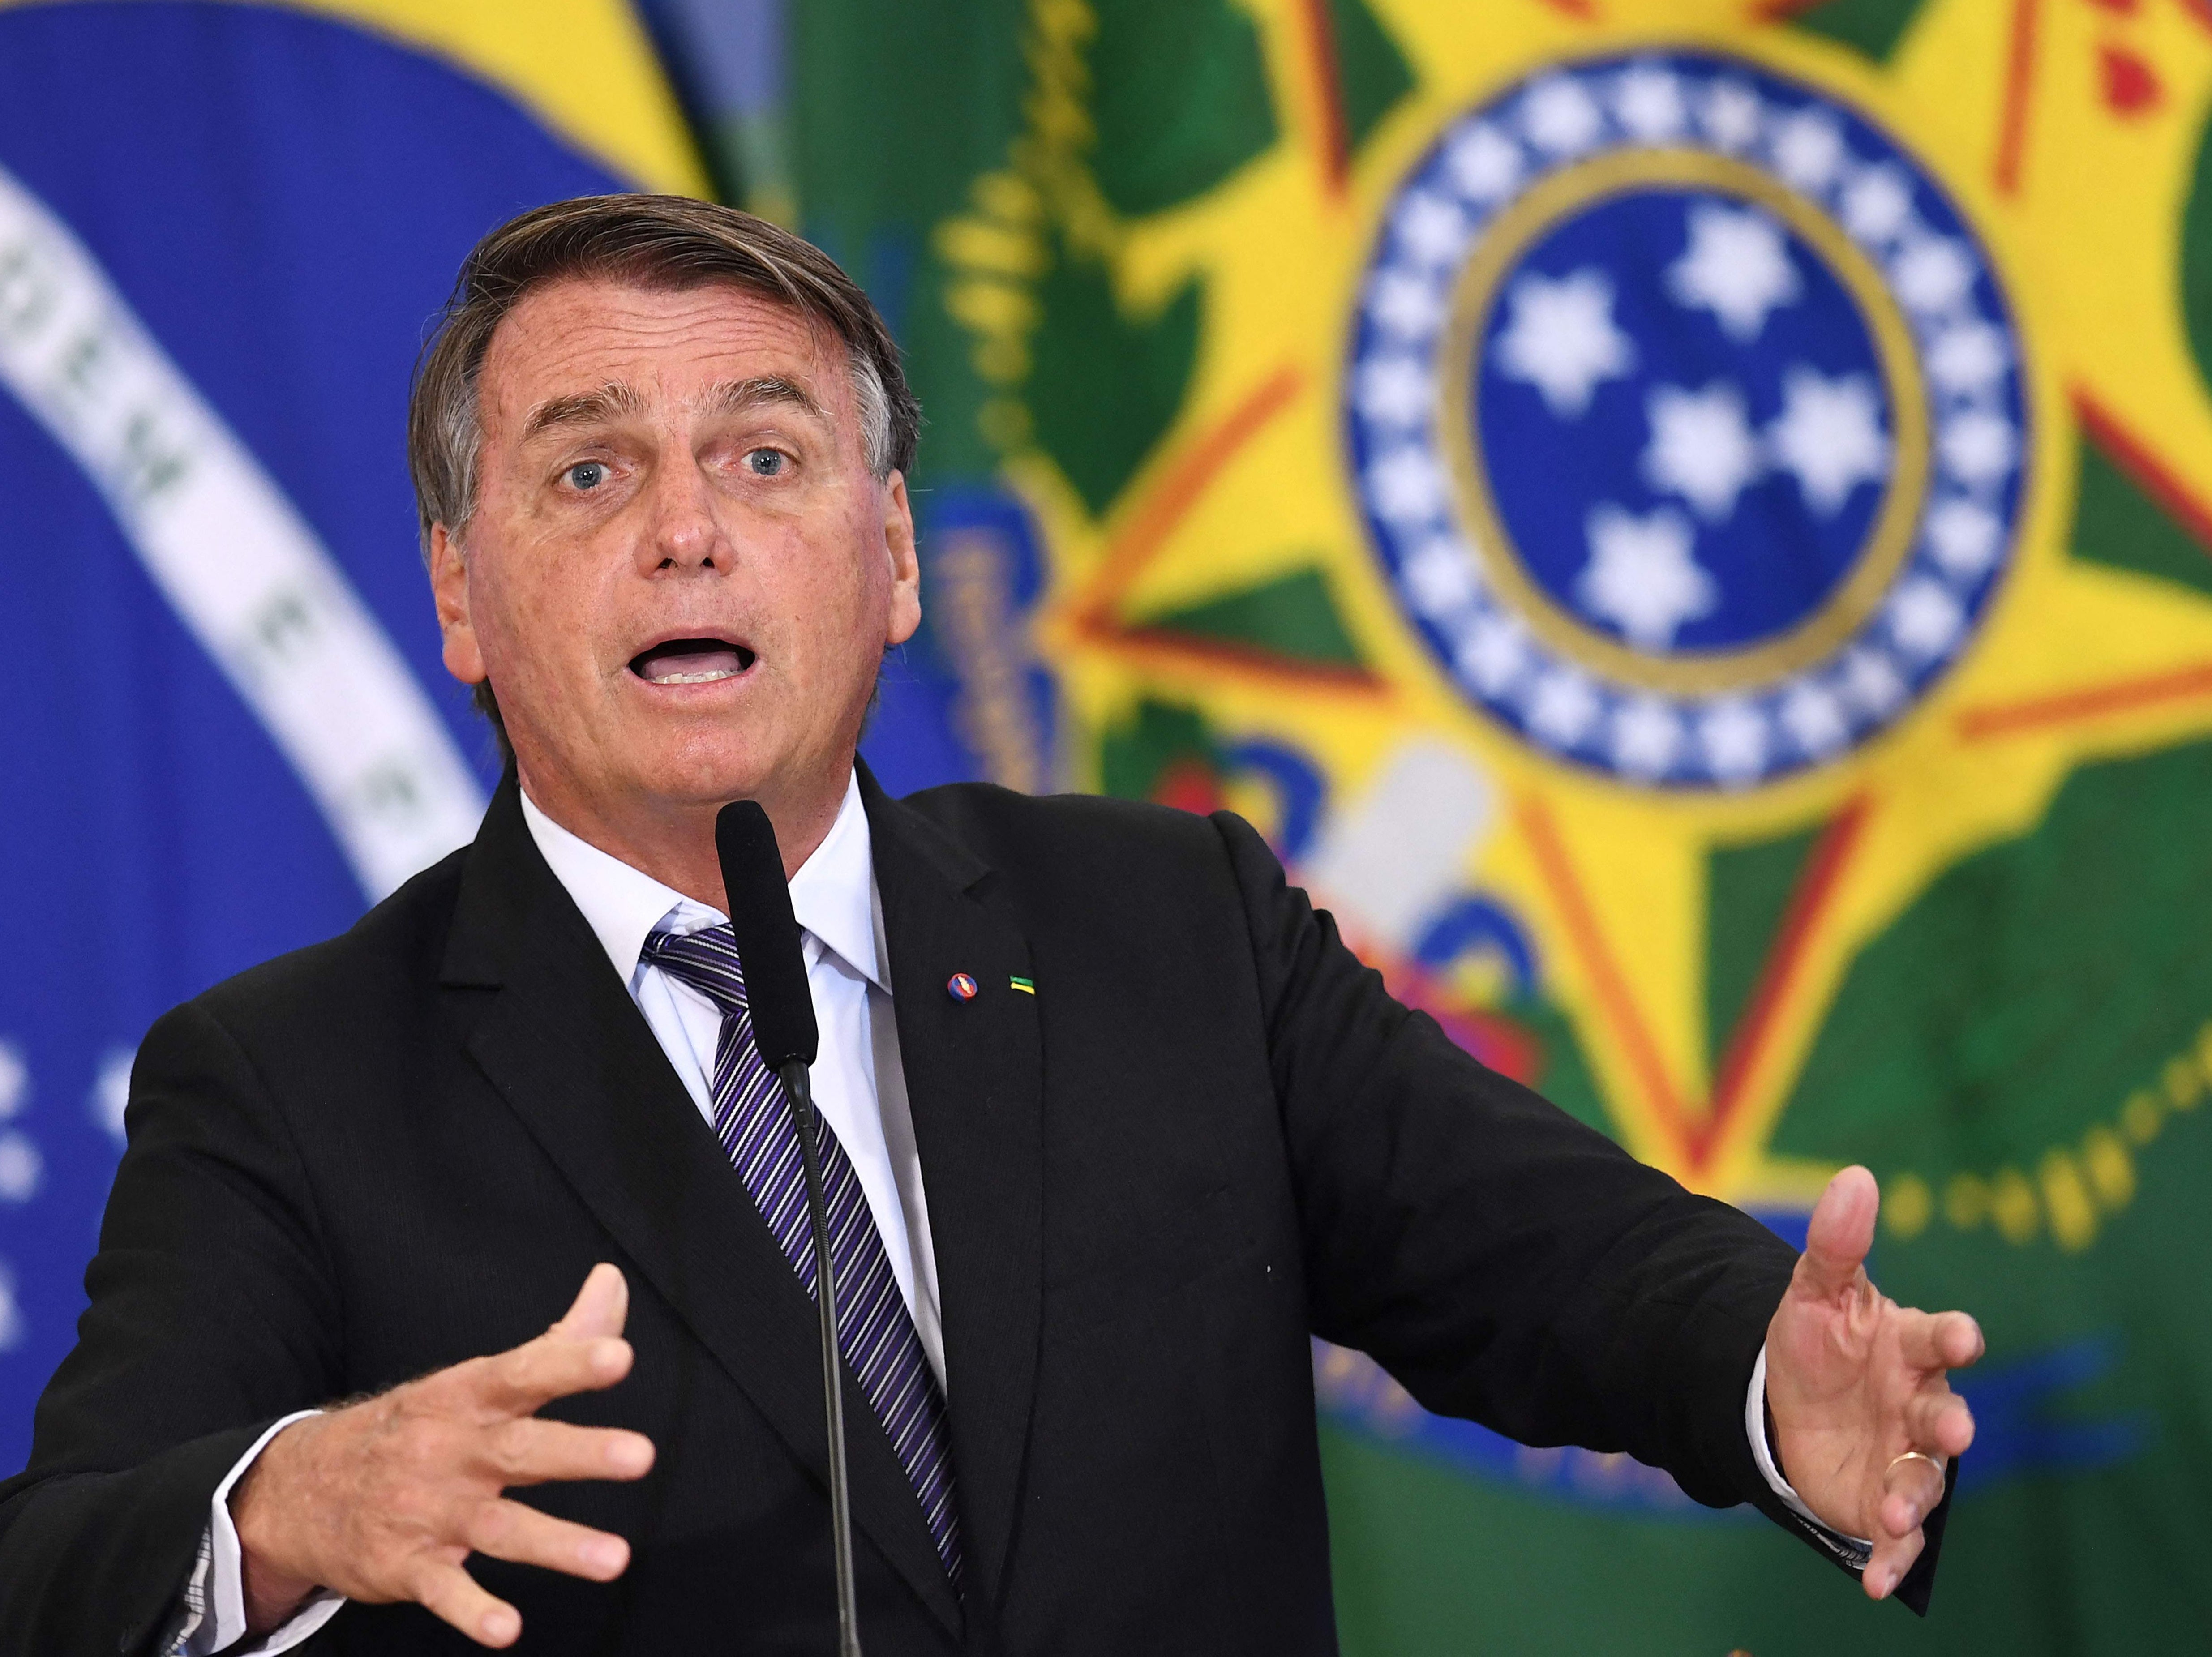 Jair Bolsonaro could be on the way out